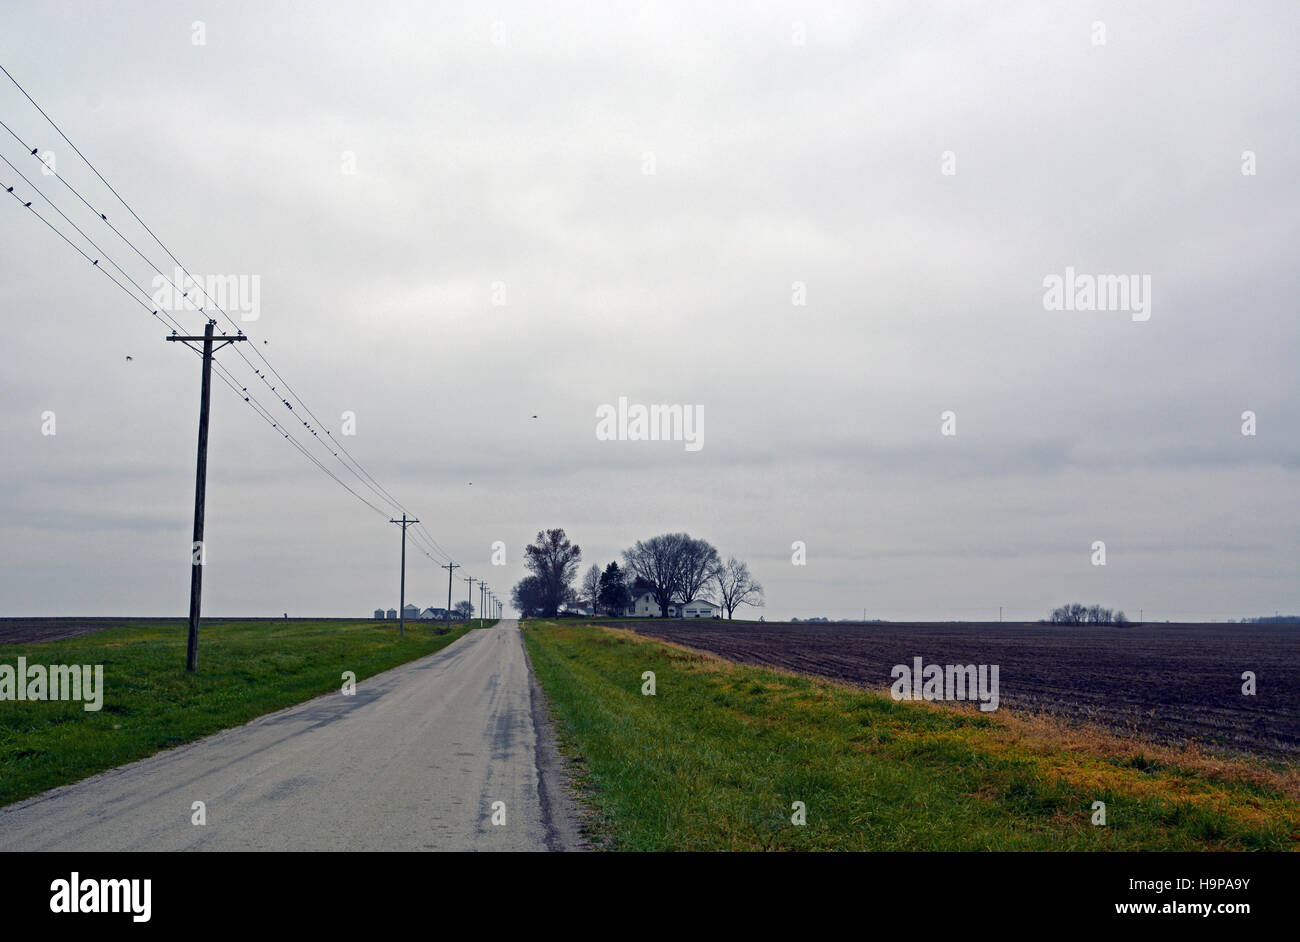 Telephone and power poles stretch off into the distance under cold gray November skies in the Midwestern United States. Stock Photo